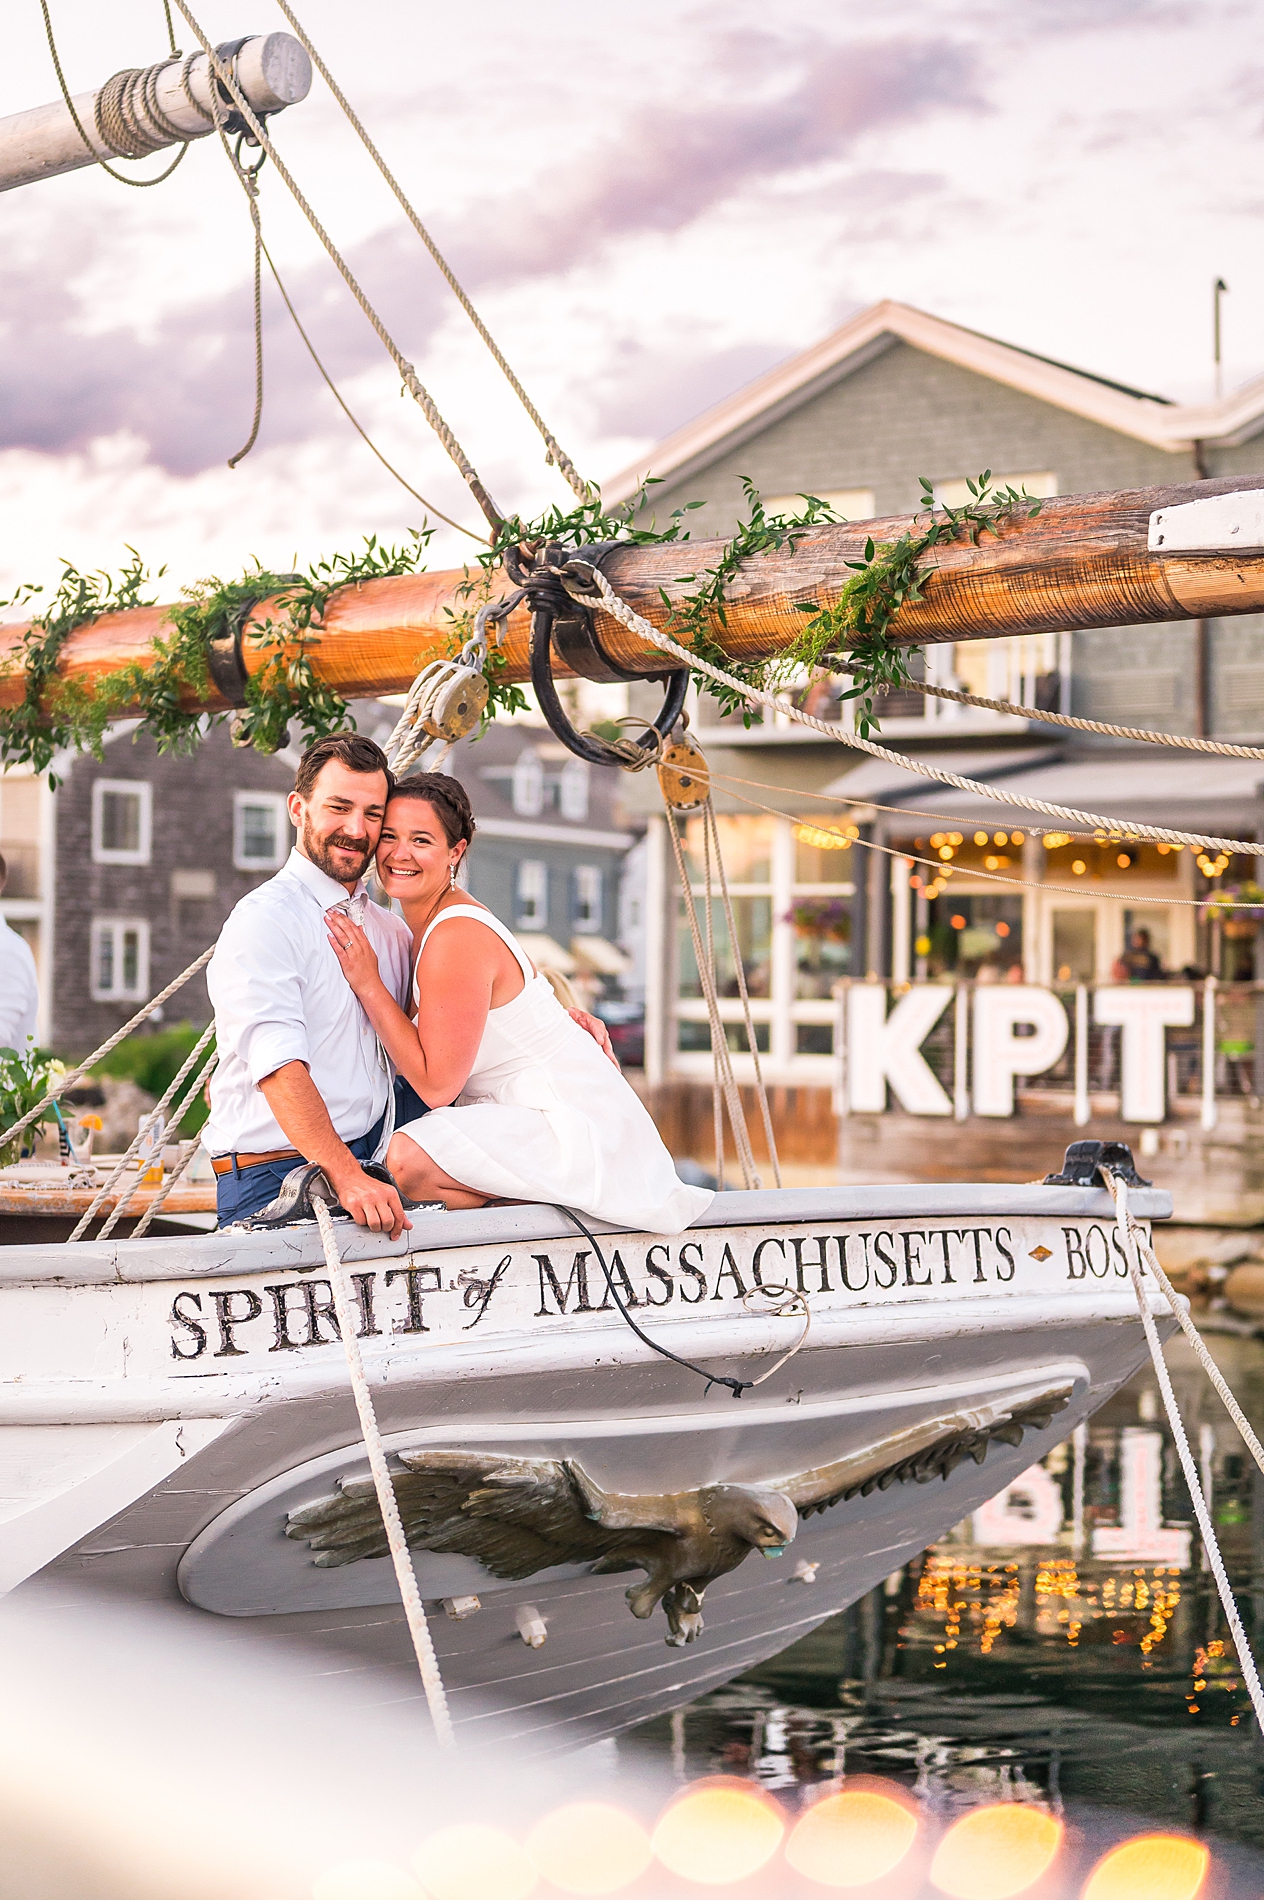 newlyweds sit on front of sailboat after Timeless Sunset Beach Wedding